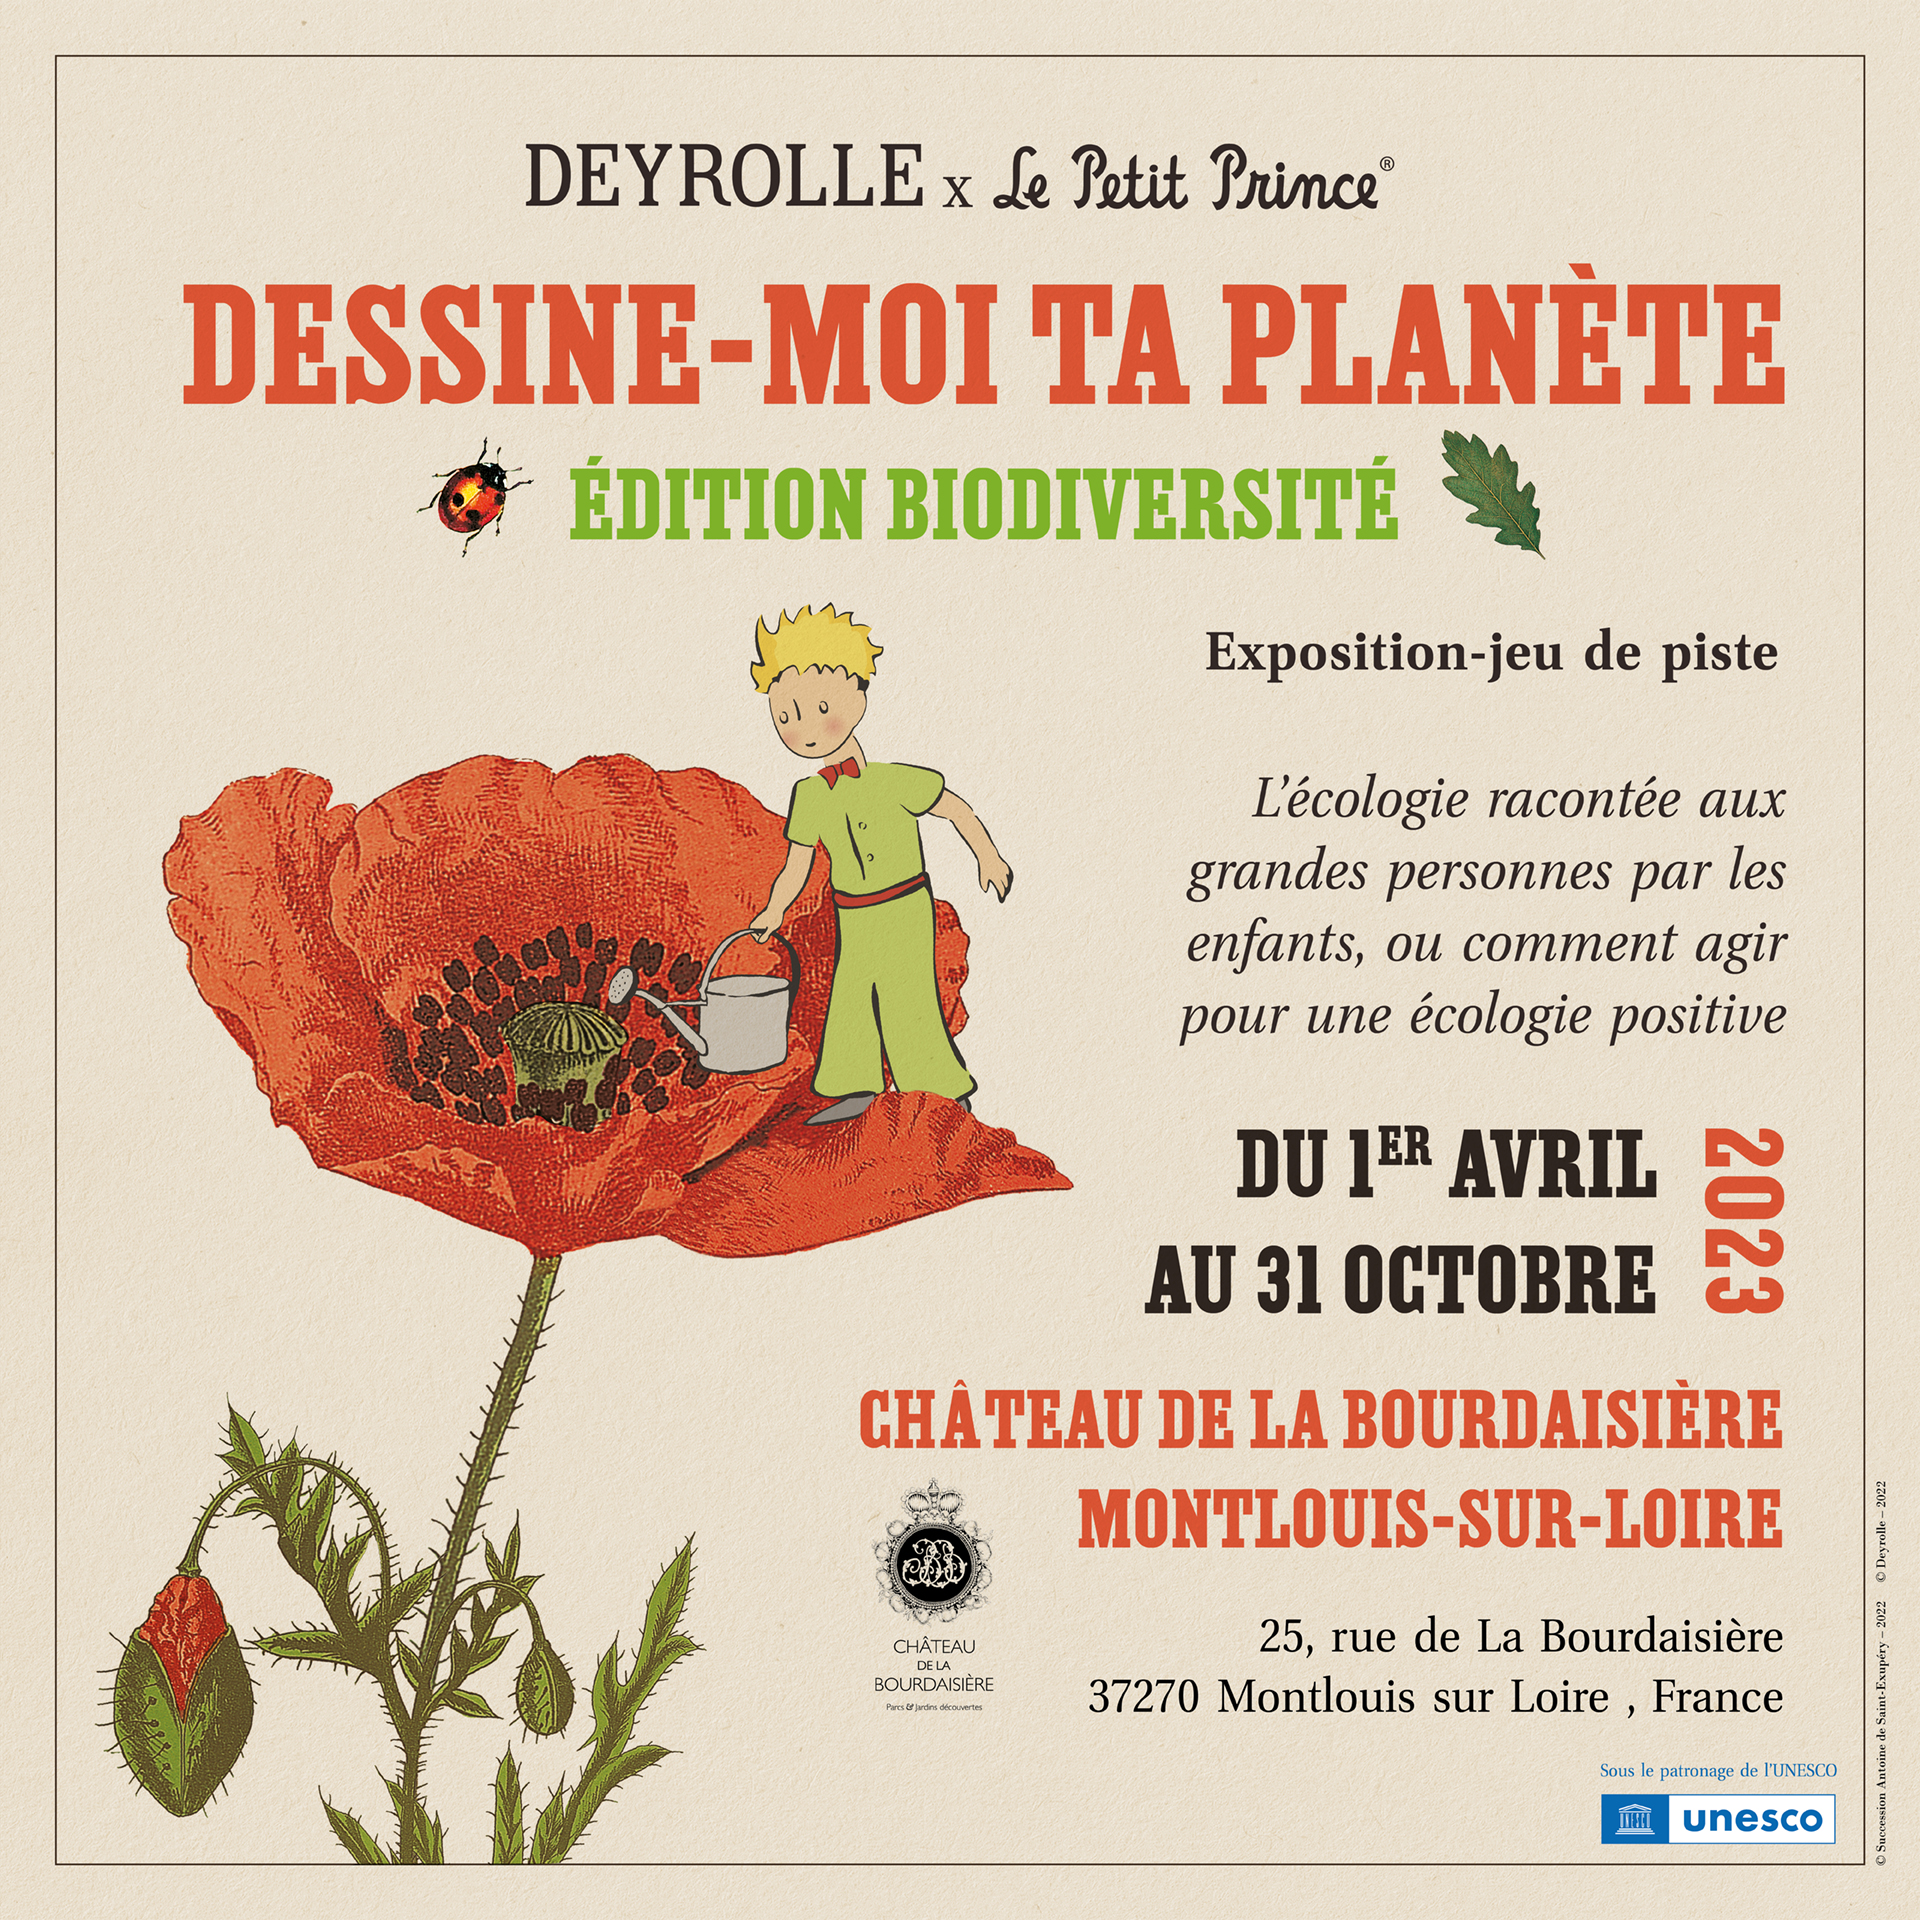 “Draw me your planet” exhibition